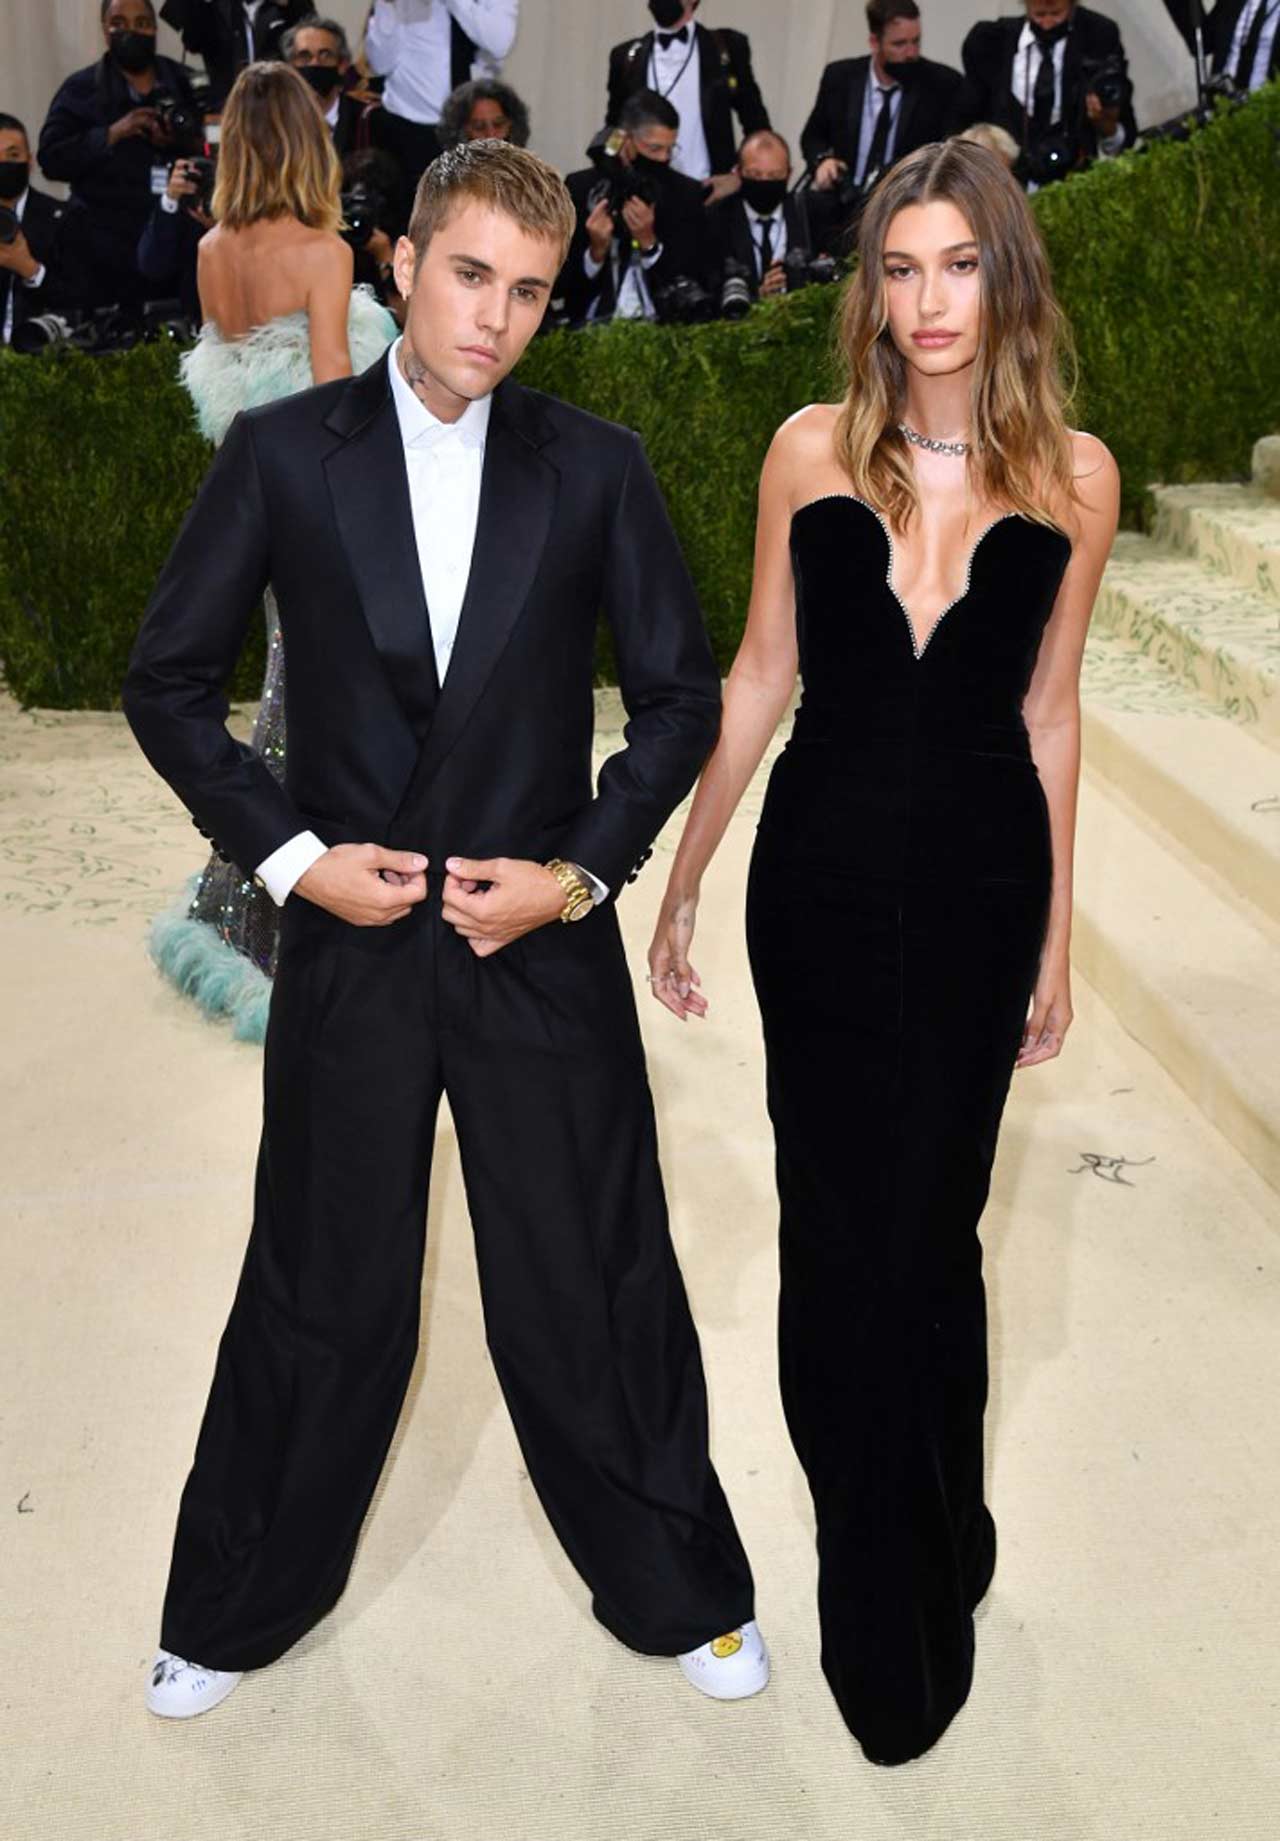 Justin Bieber and Hailey Baldwin Bieber rocked the Met Gala 2021 carpet for real! Twinning in black, Justin and Hailey walked hand in hand at the Met Gala 2021. While Justin wore a dark suit, Hailey opted for a black gown with a plunging neckline. This is Justin's first appearance at the Met Gala after 2015. On the other hand, Hailey was last in attendance in 2019.